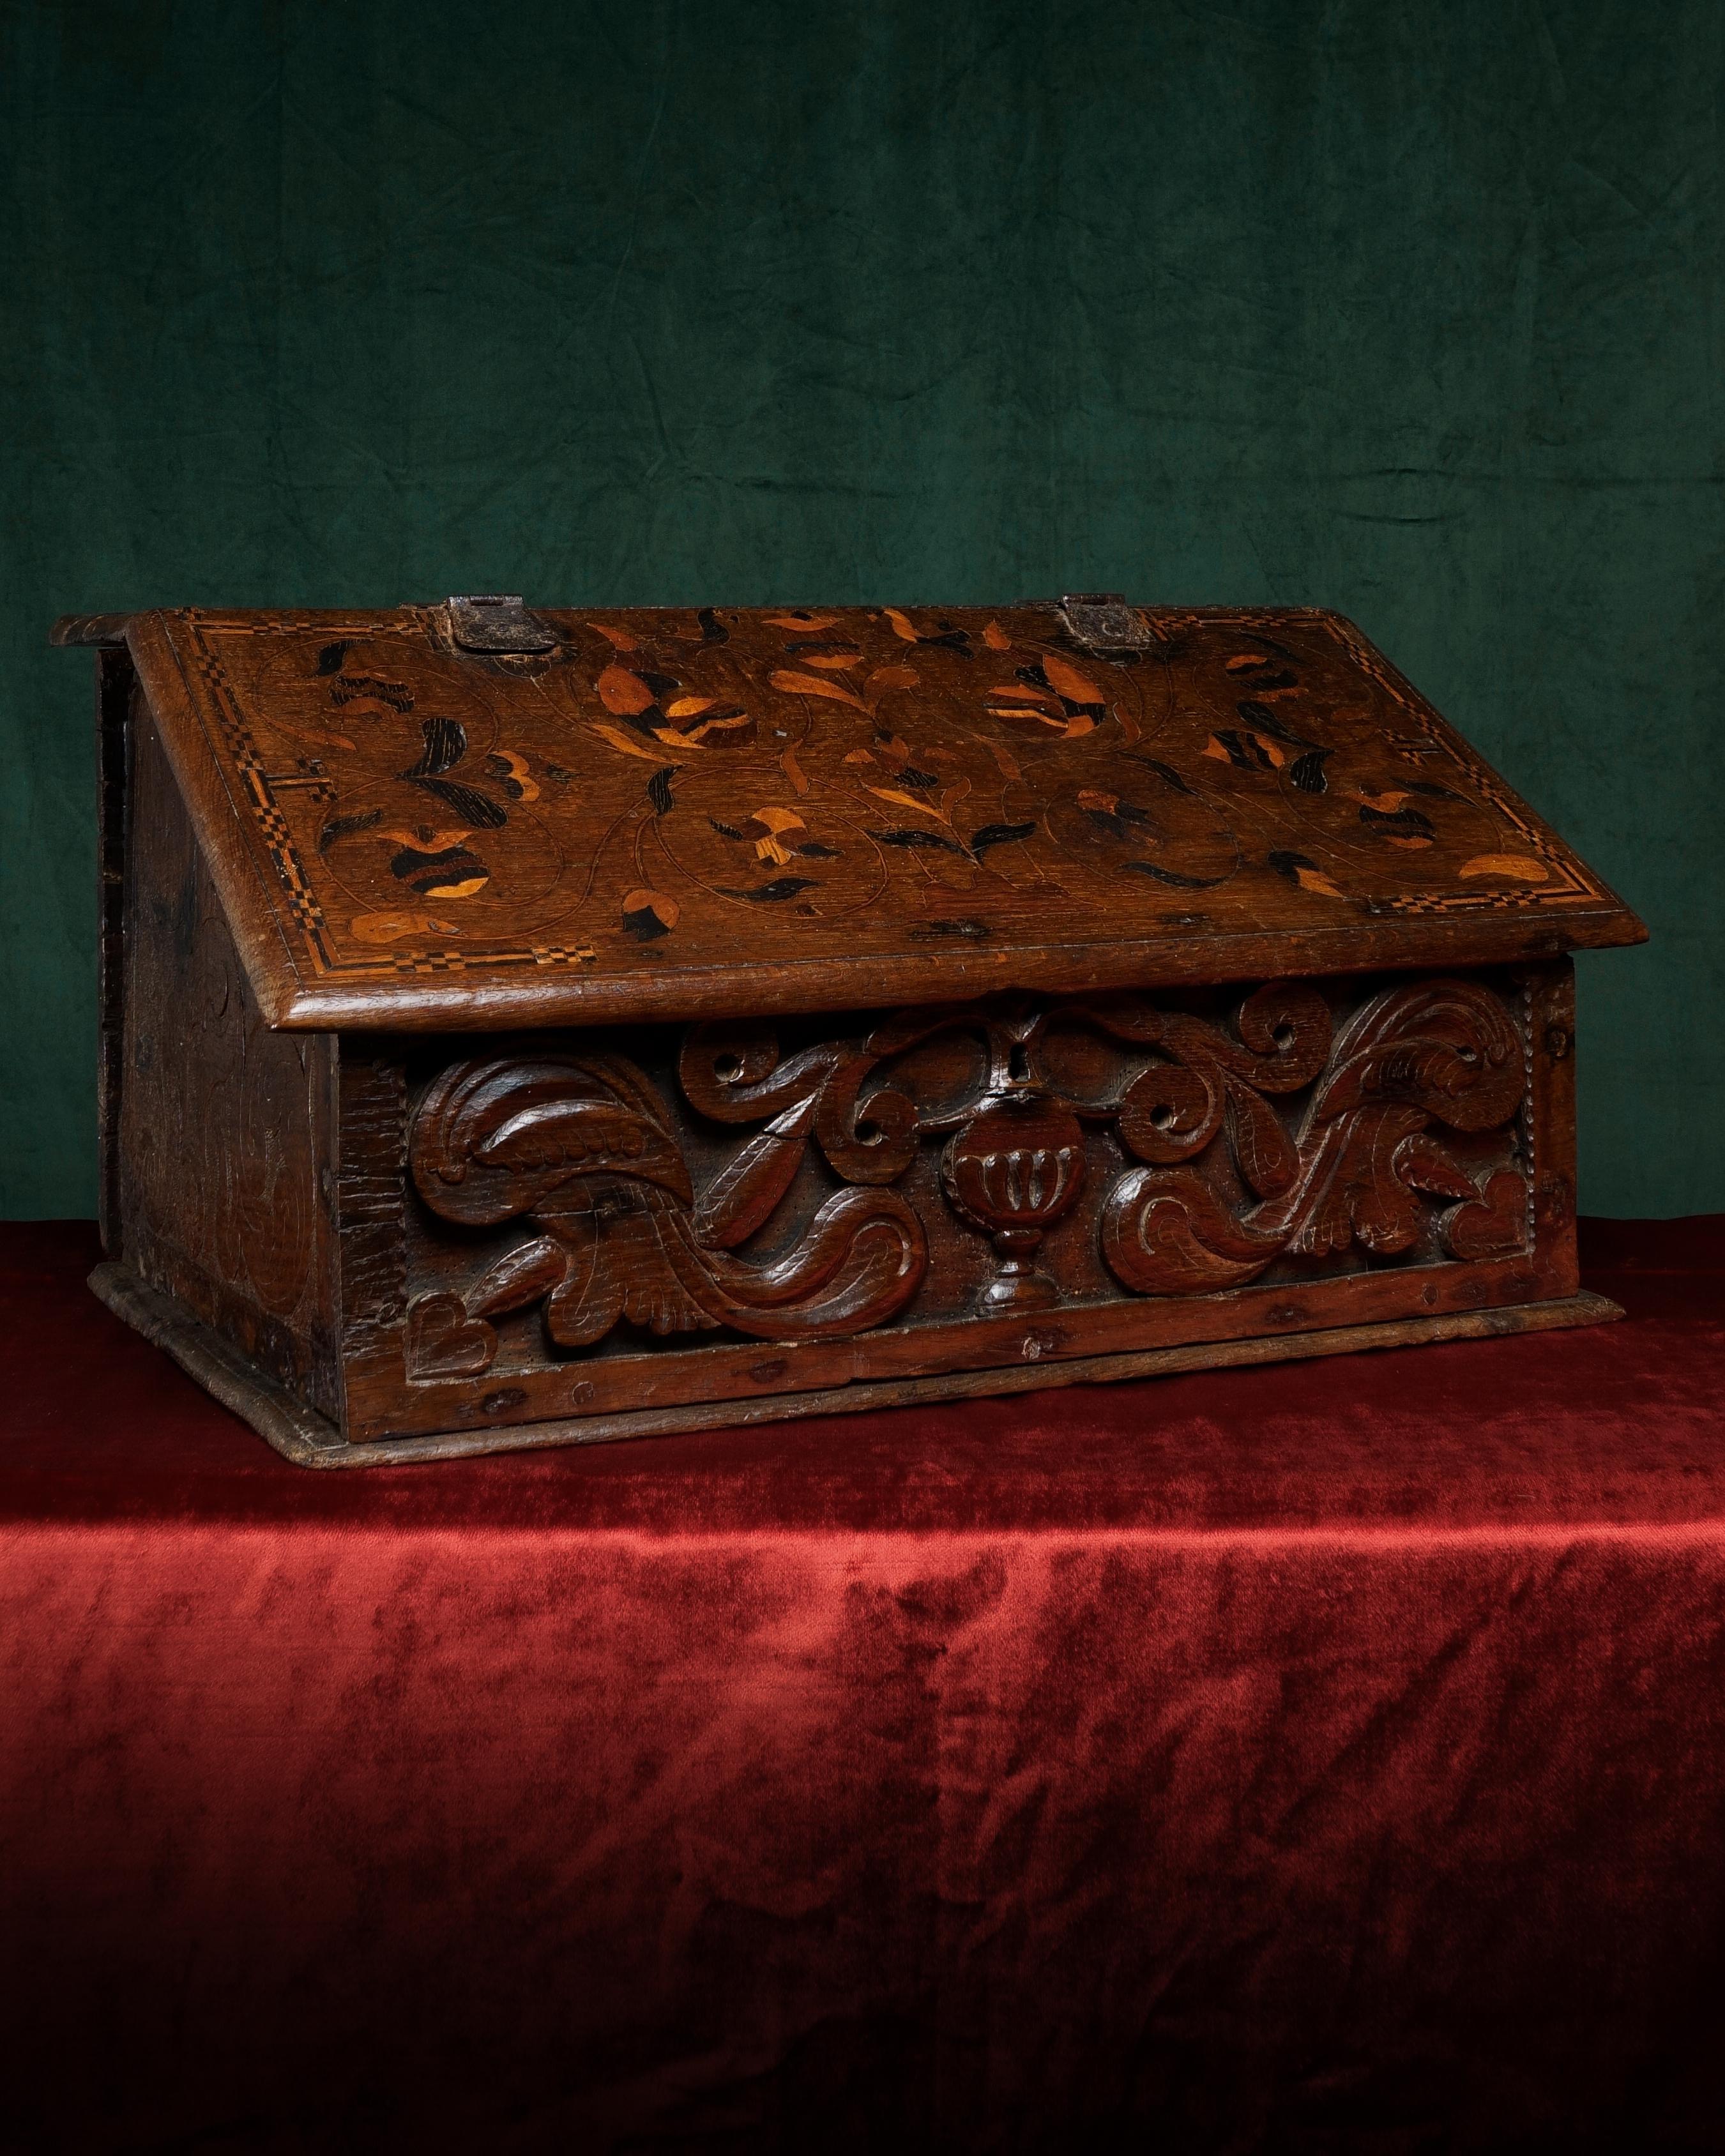 The top board bearing marquetry-inlaid initials ‘MA’, the slope with further marquetry-inlaid flowers and meandering foliage, enclosing an interior with a shelf, the end boards boldly carved with foliage, the front board carved with a flower-filled